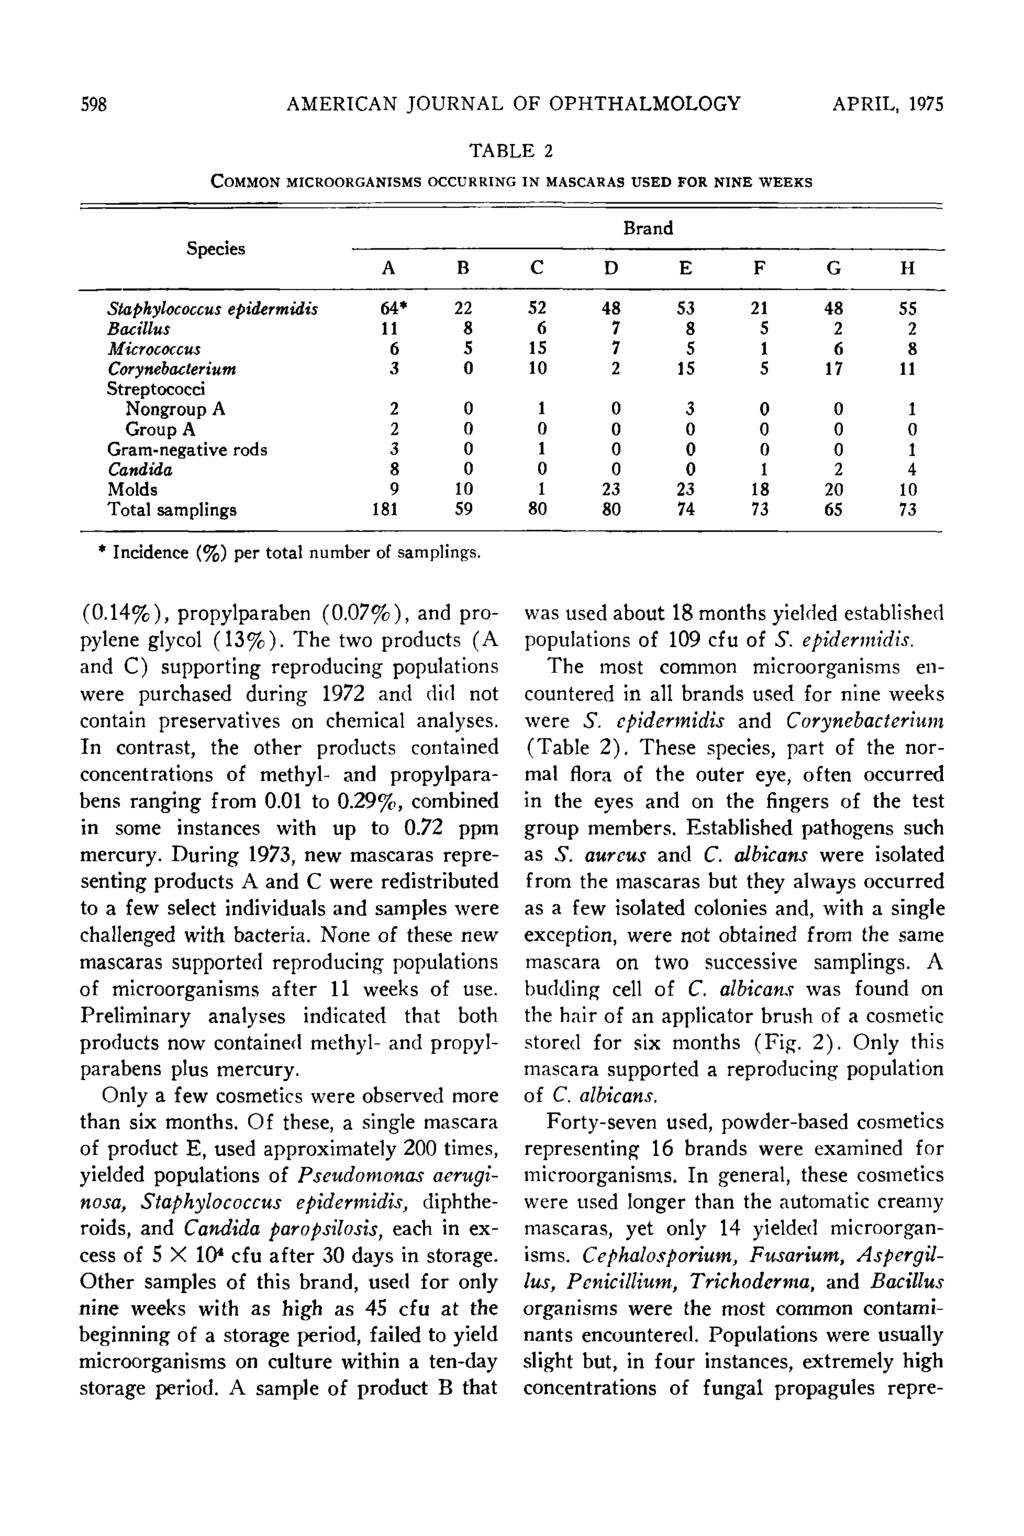 9 AMERICAN JOURNAL OF OPHTHALMOLOGY APRIL, 97 TABLE COMMON MICROORGANISMS OCCURRING IN MASCARAS USED FOR NINE WEEKS Species A B c D Brand E F G H Staphylococcus epidermidis Bacillus Micrococcus